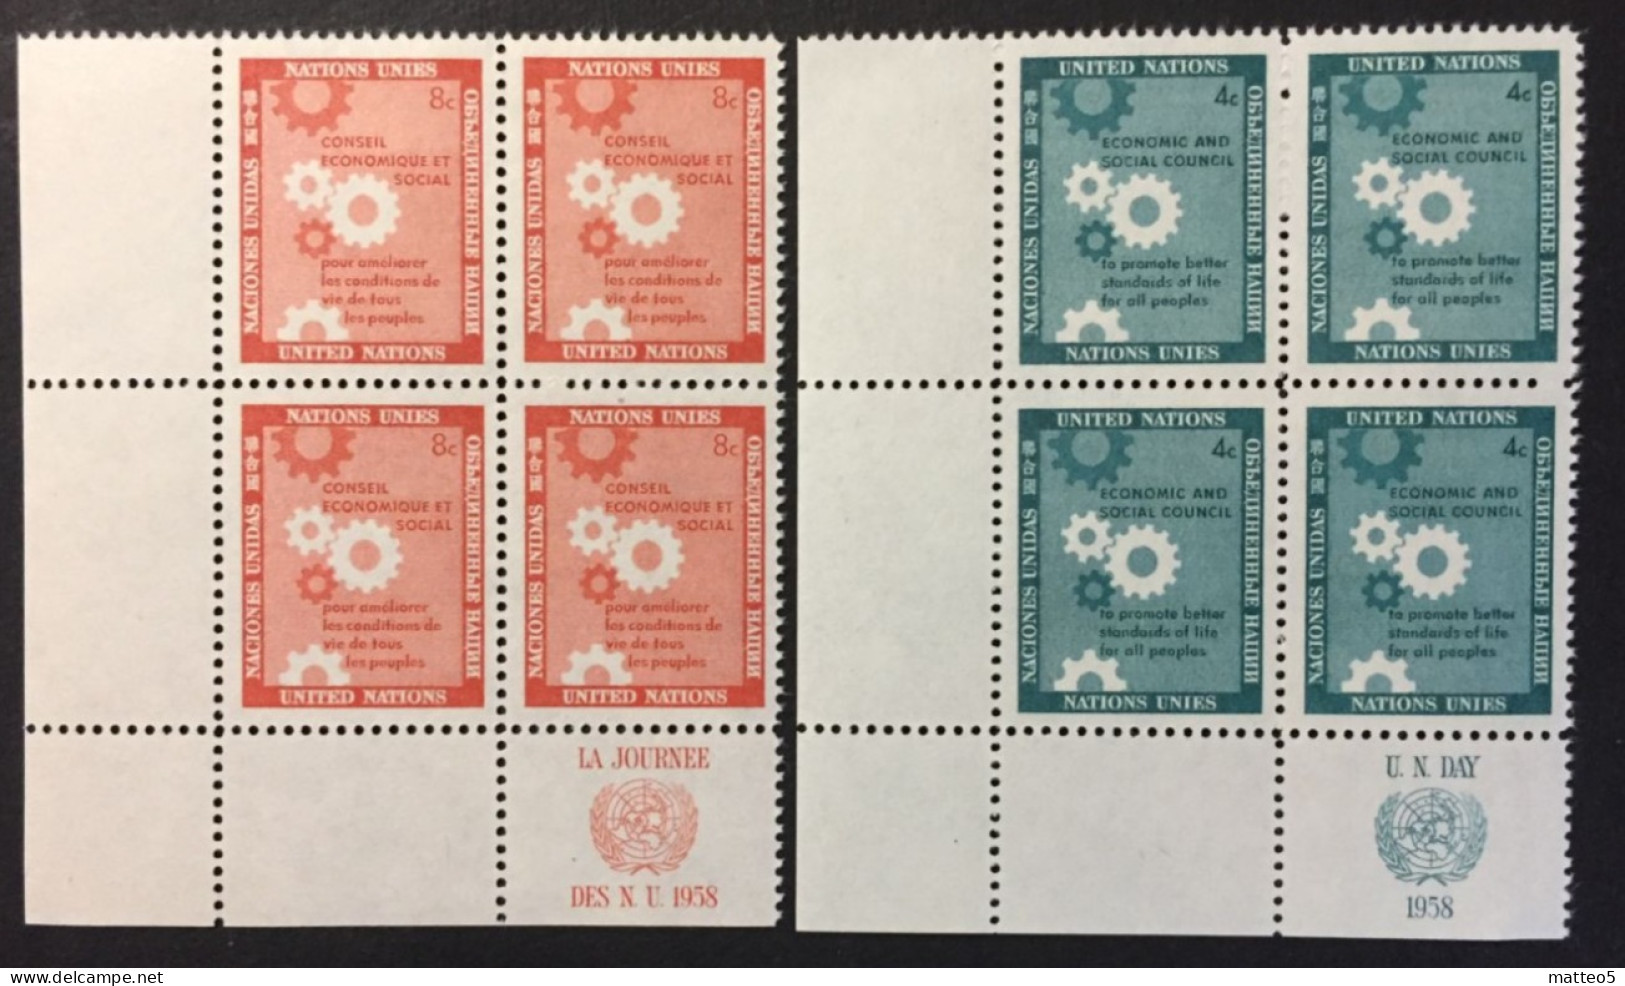 1958 - United Nations UNO UN ONU - Economic  And Social Council, Gearwheels - 2x4 Stamps   Unused - Neufs